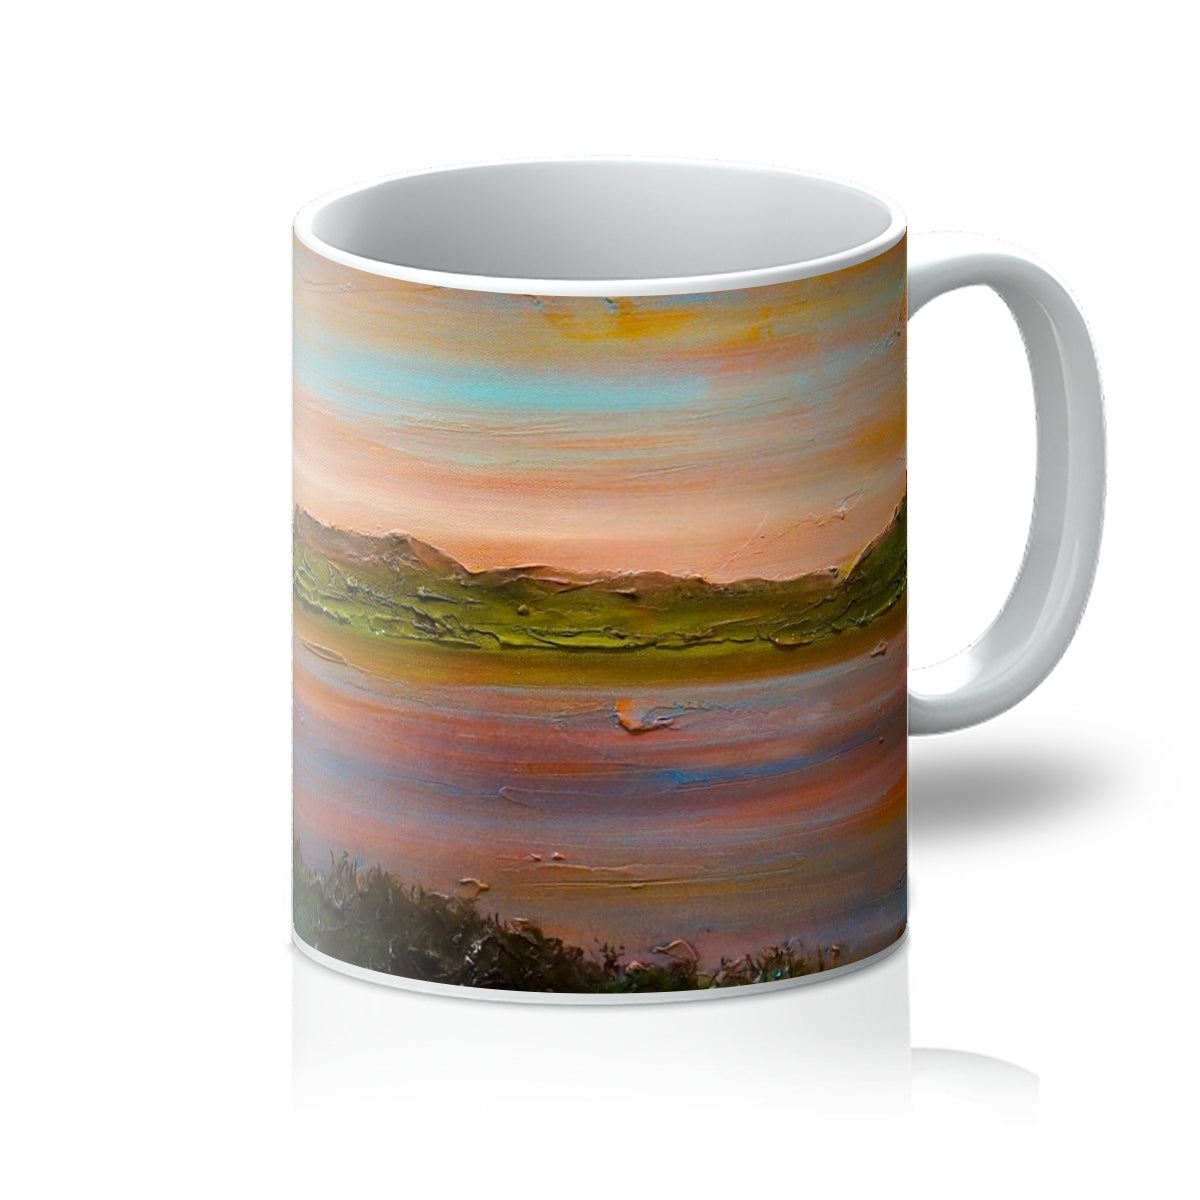 Gourock Golf Club Sunset Art Gifts Mug-Homeware-River Clyde Art Gallery-11oz-White-Paintings, Prints, Homeware, Art Gifts From Scotland By Scottish Artist Kevin Hunter